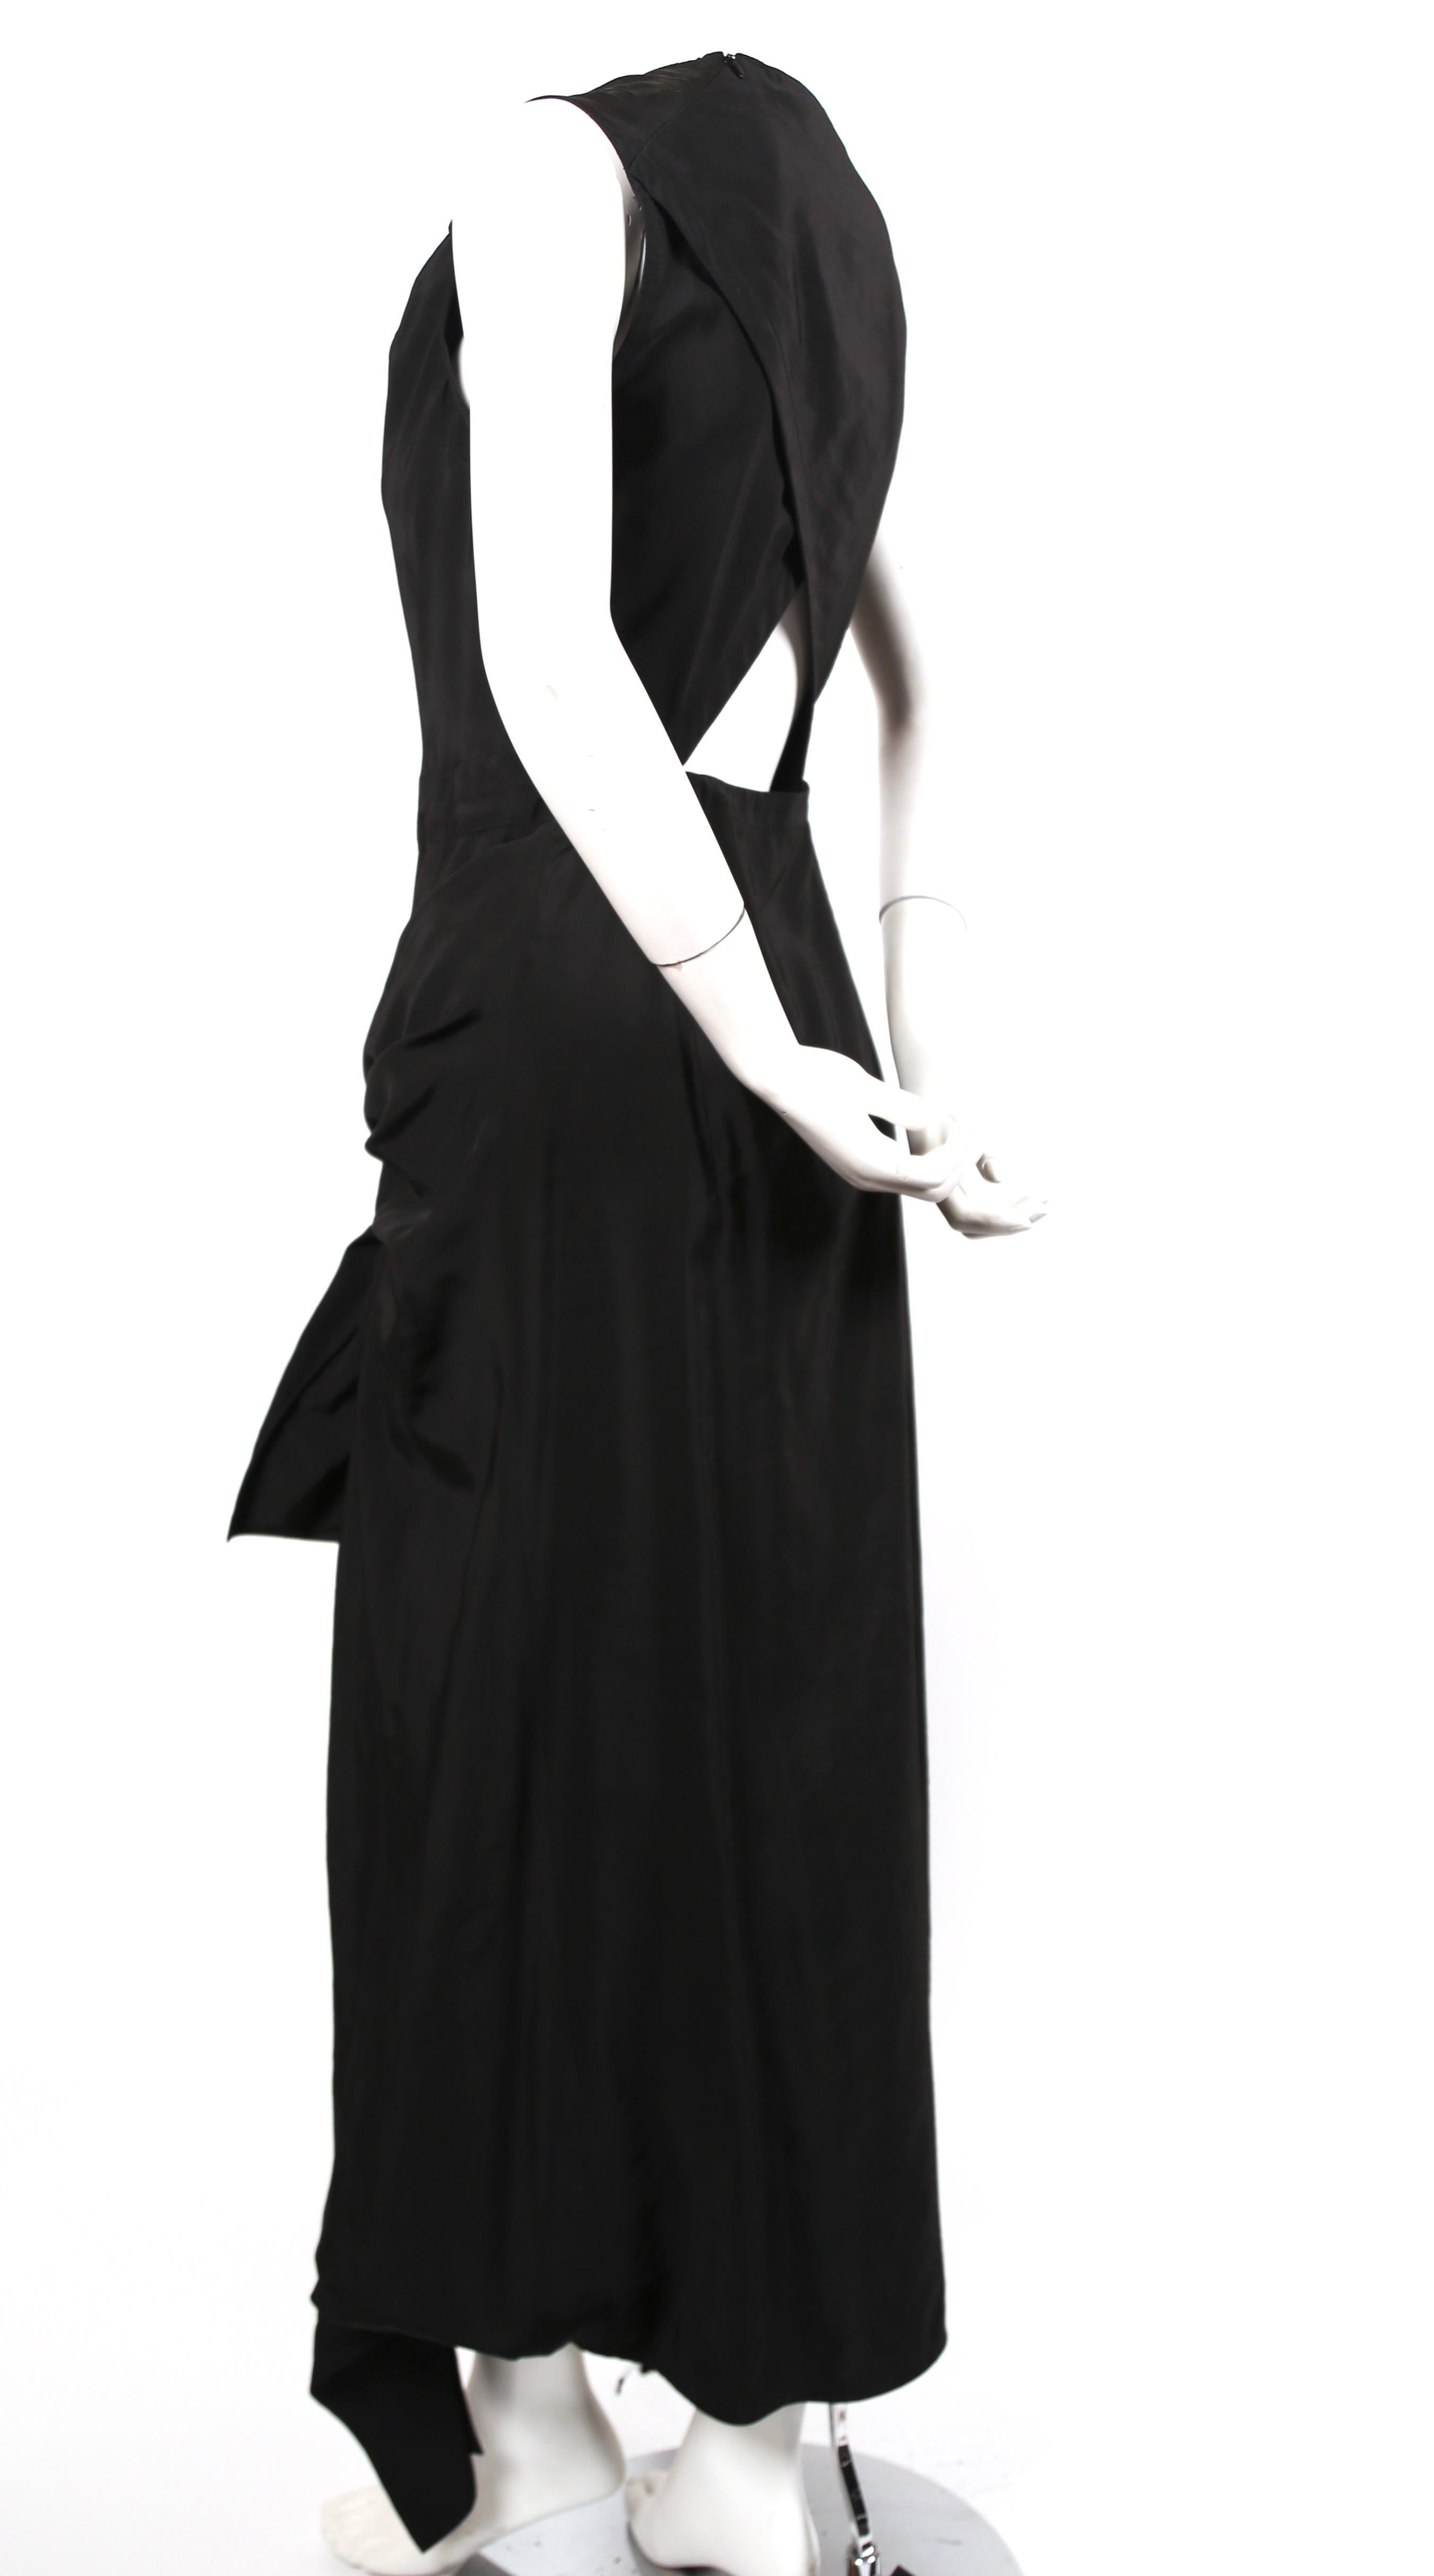 Celine By Phoebe Philo black dress with ties and cut out back at ...